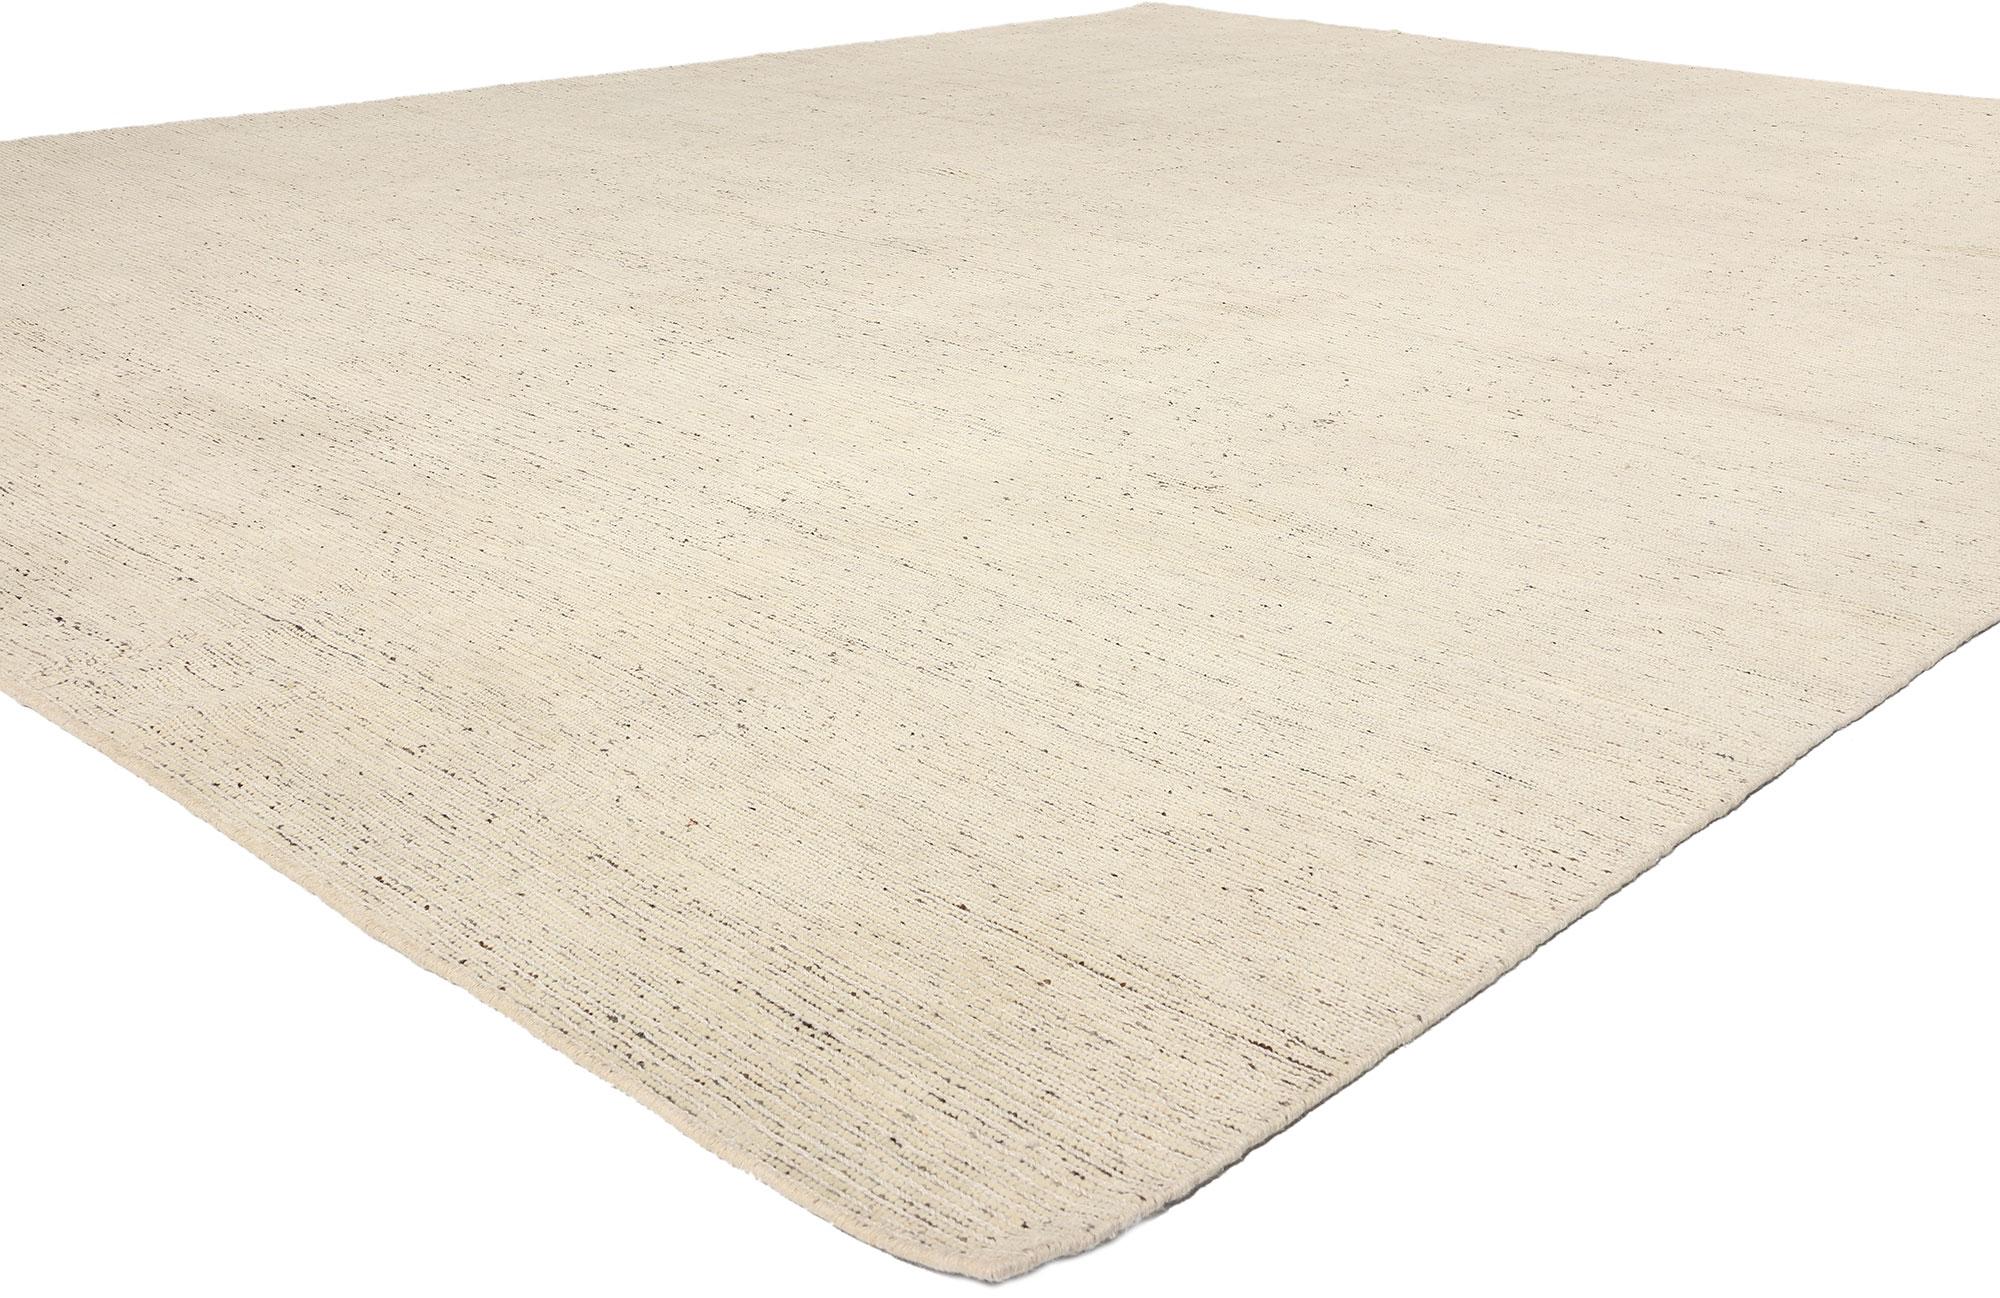 81107 Large Organic Modern Moroccan Rug, 11'10 x 14'09. Step into a world where elegance dances hand in hand with serene comfort, guided by the captivating allure of this meticulously crafted Organic Modern Shibui Moroccan area rug, woven with the